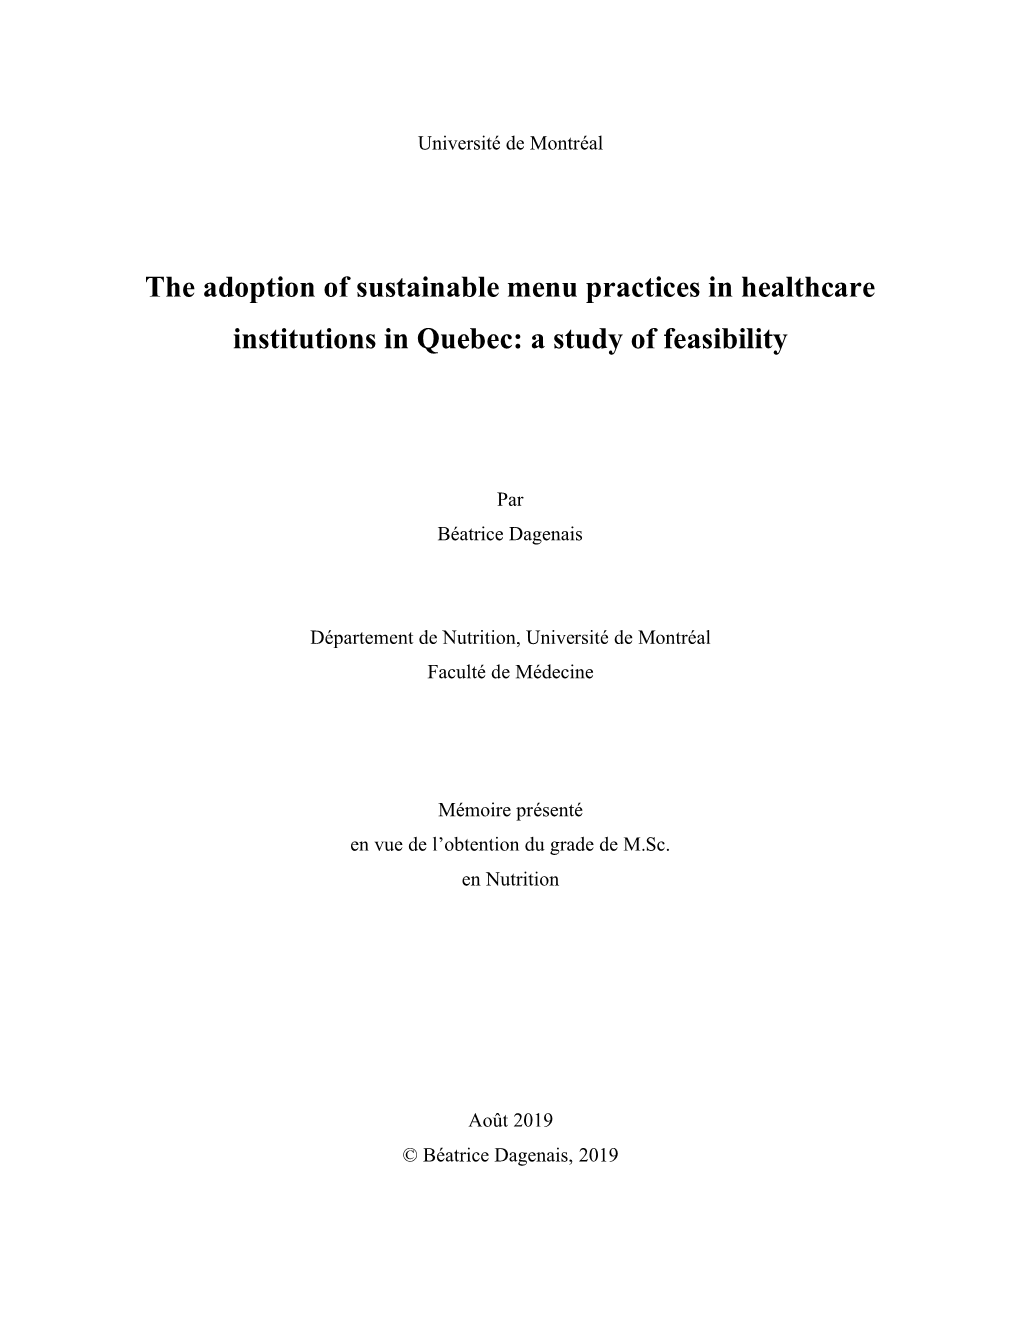 The Adoption of Sustainable Menu Practices in Healthcare Institutions in Quebec: a Study of Feasibility